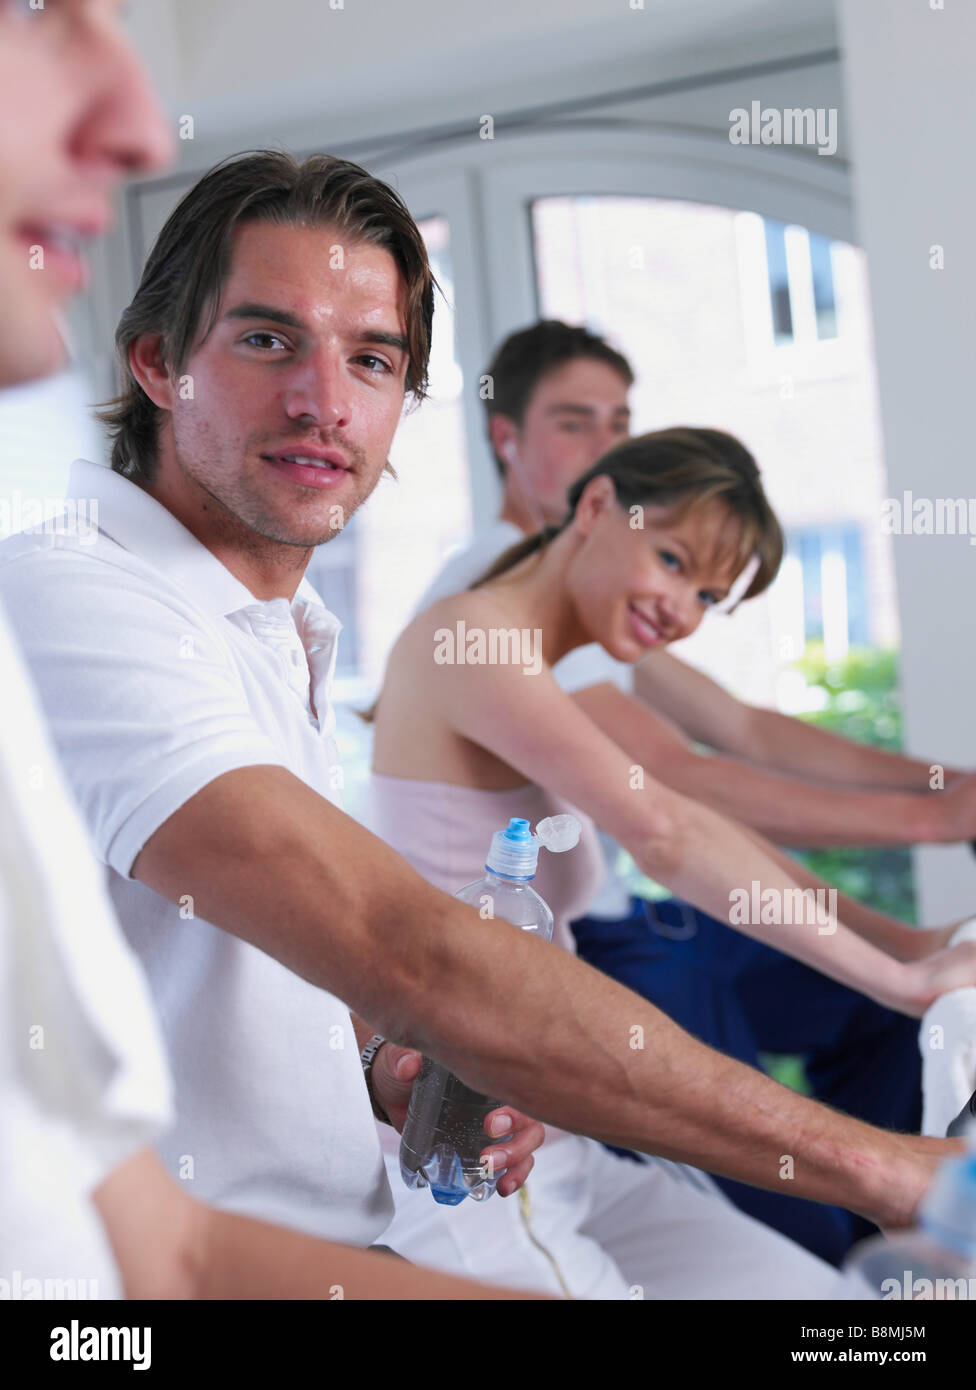 young man on training Stock Photo